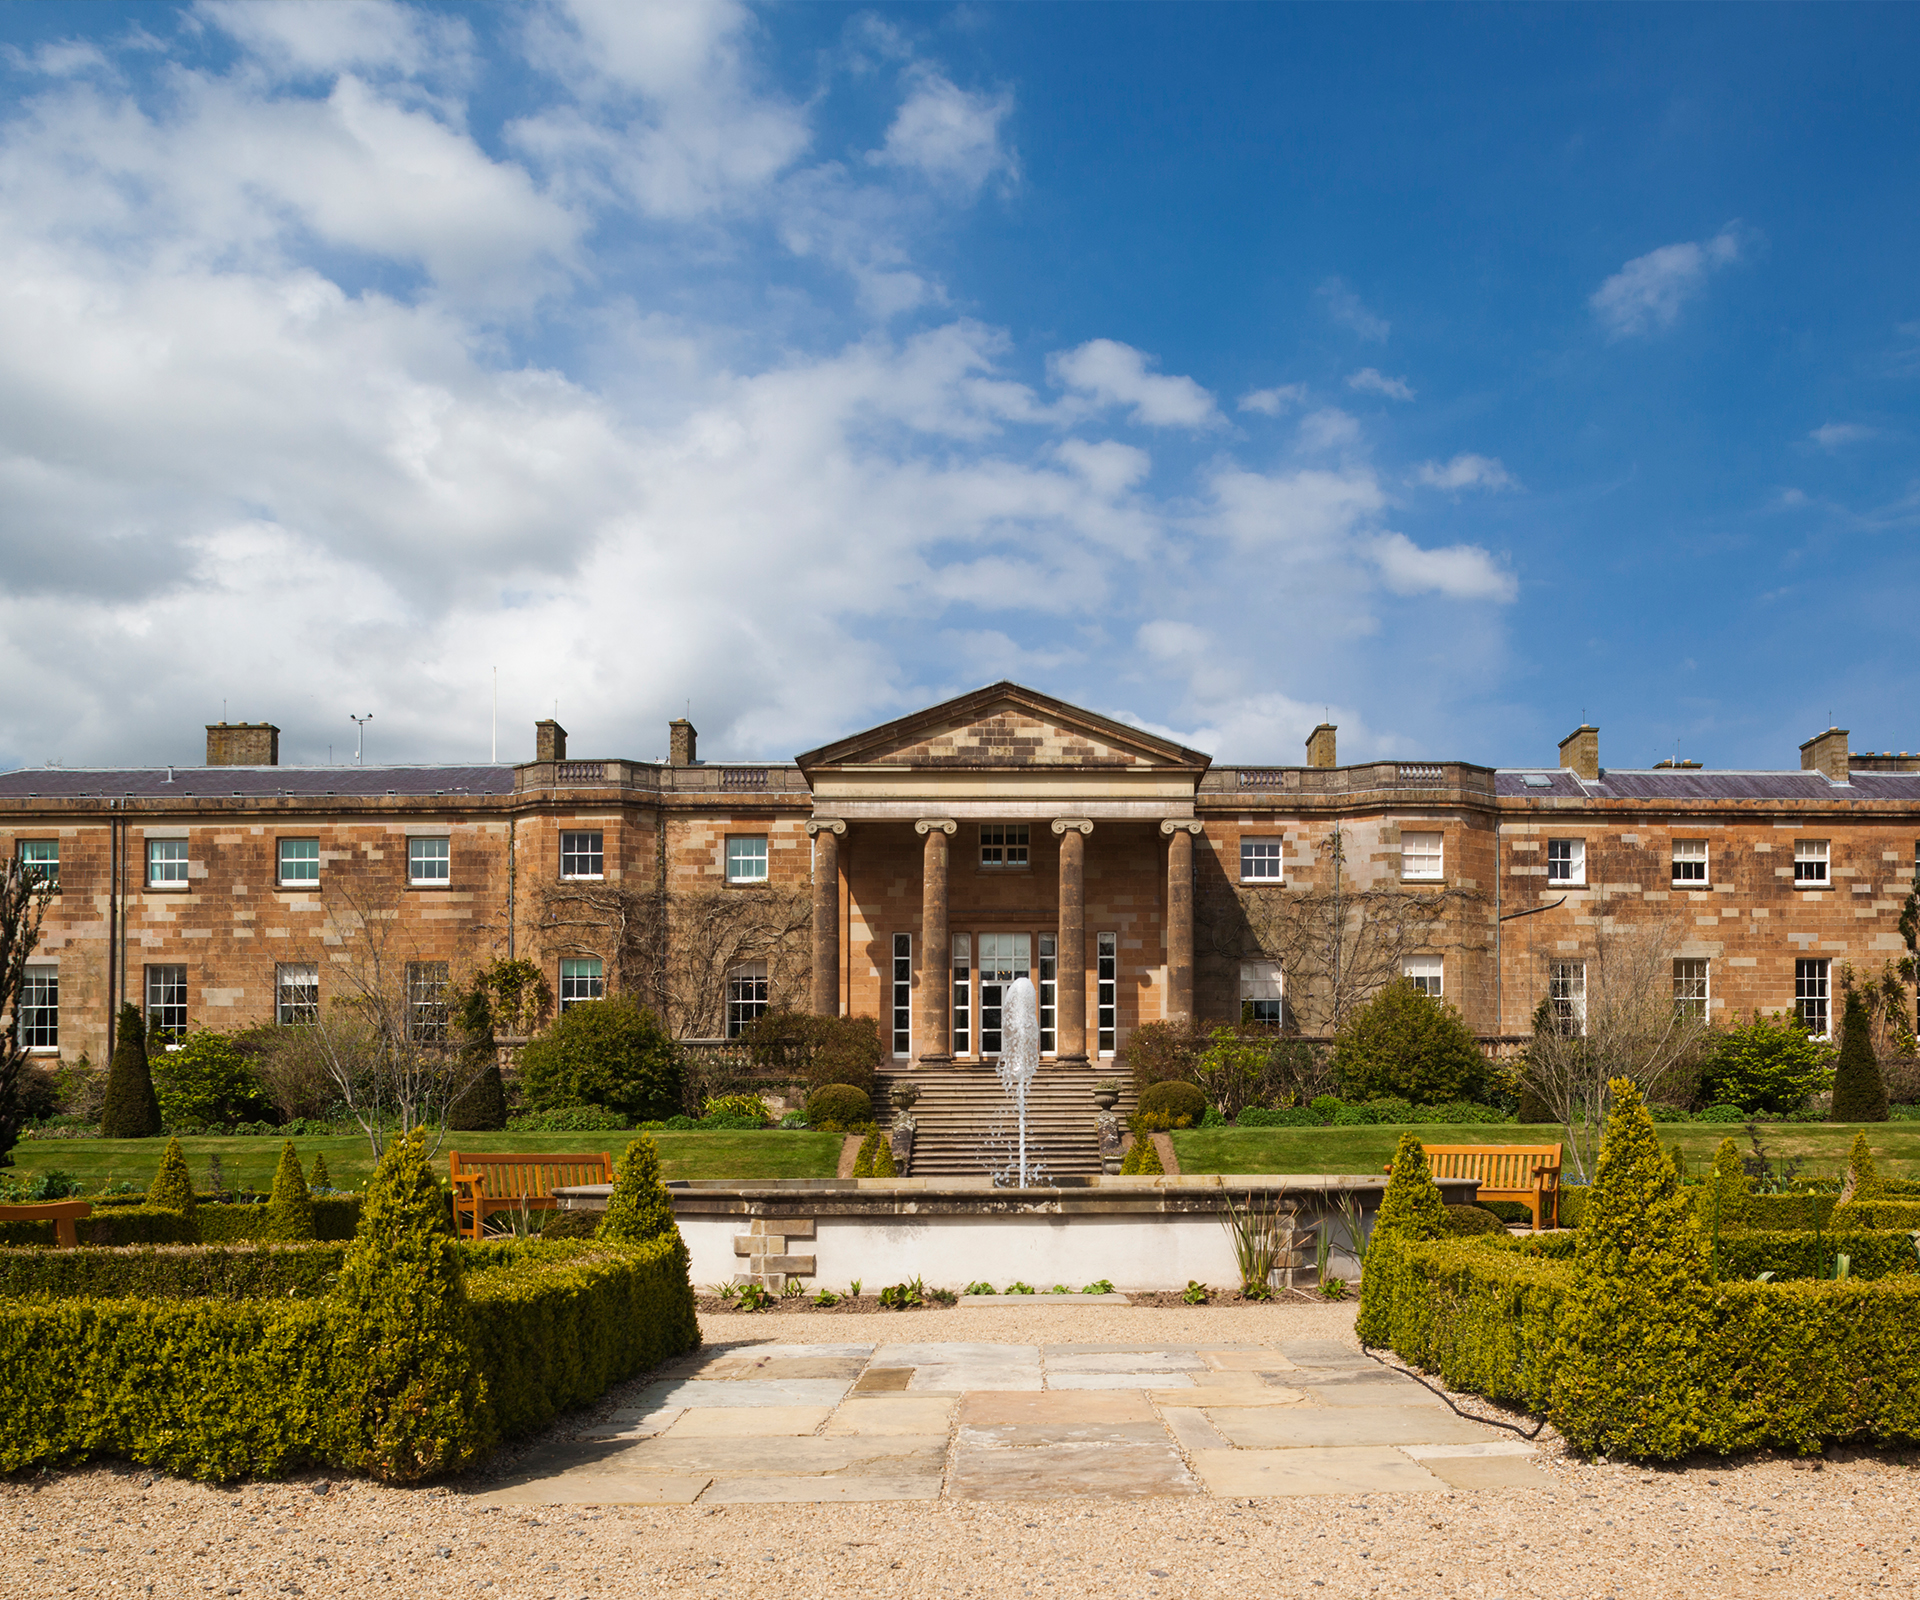 homes owned by the British royal family: Hillsborough Castle